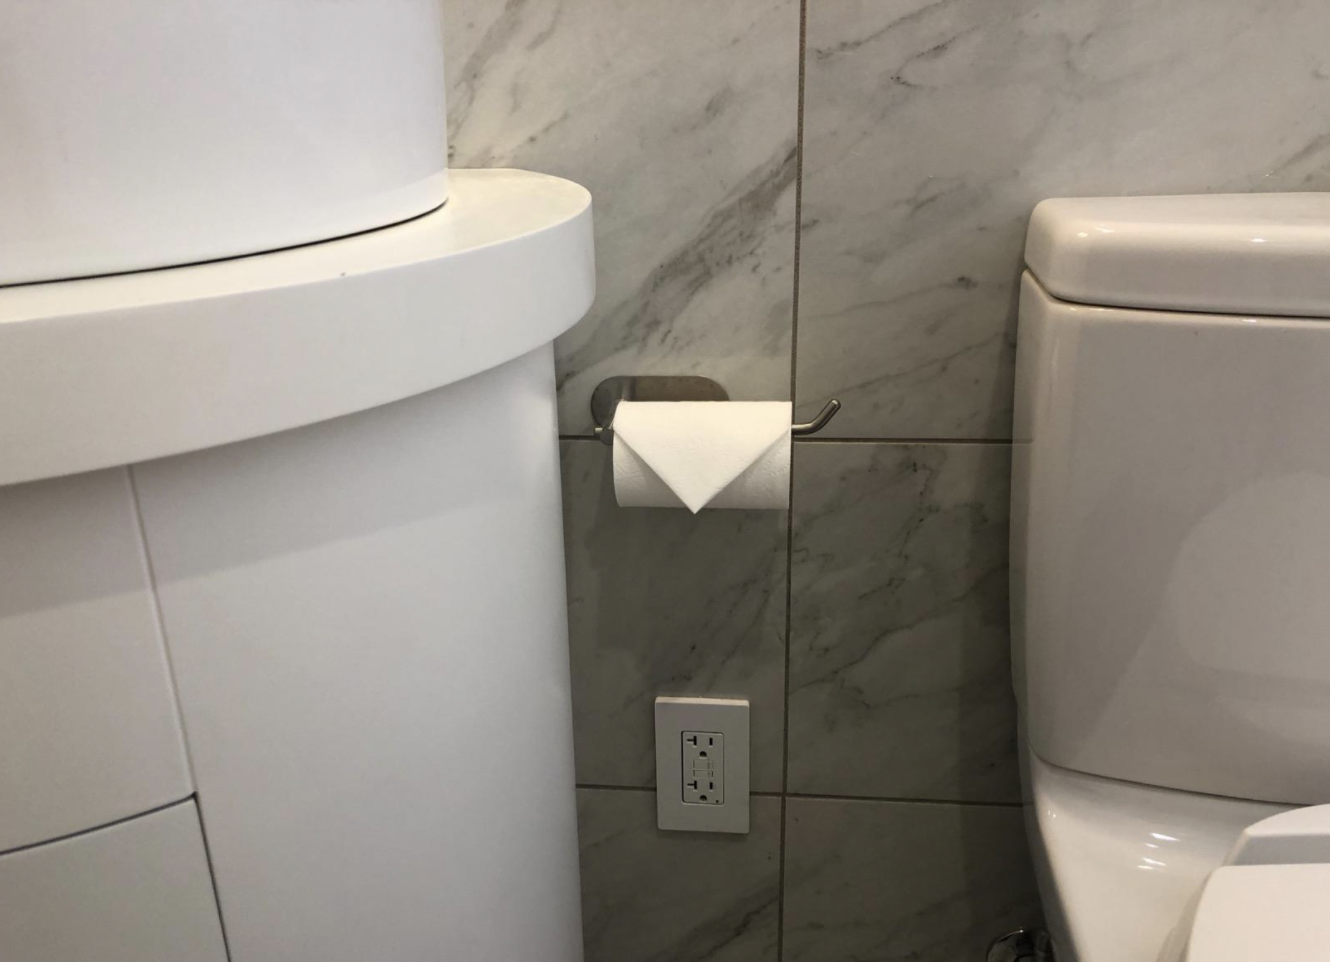 A reviewer&#x27;s toilet paper holder on the wall